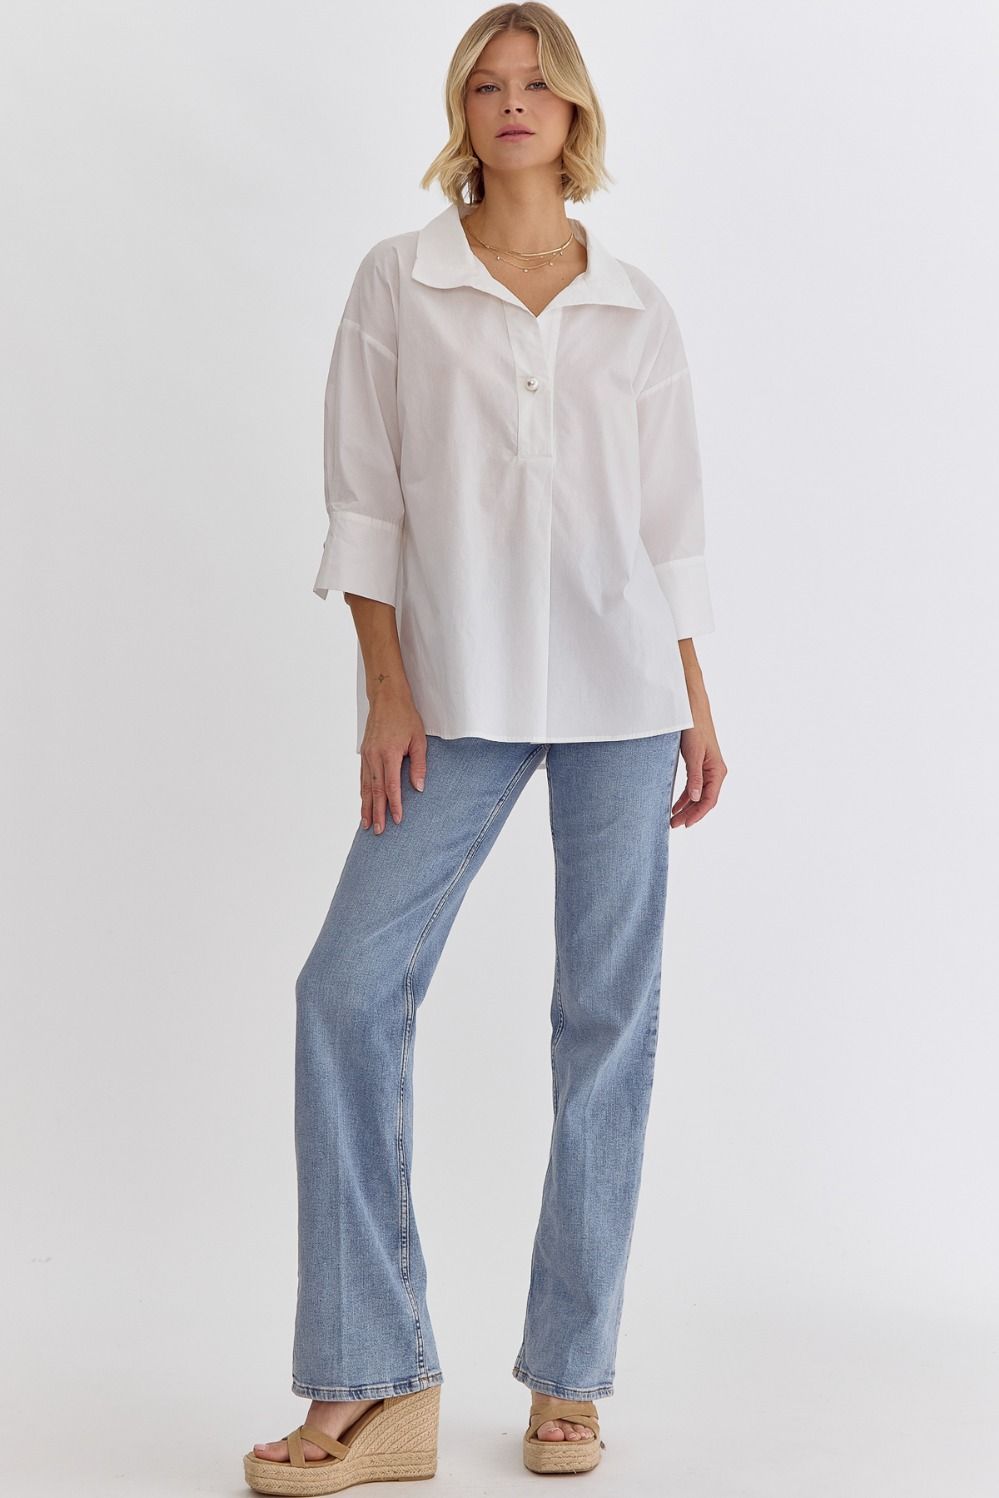 Entro | White Collared Top | Sweetest Stitch Cute Tops for Women